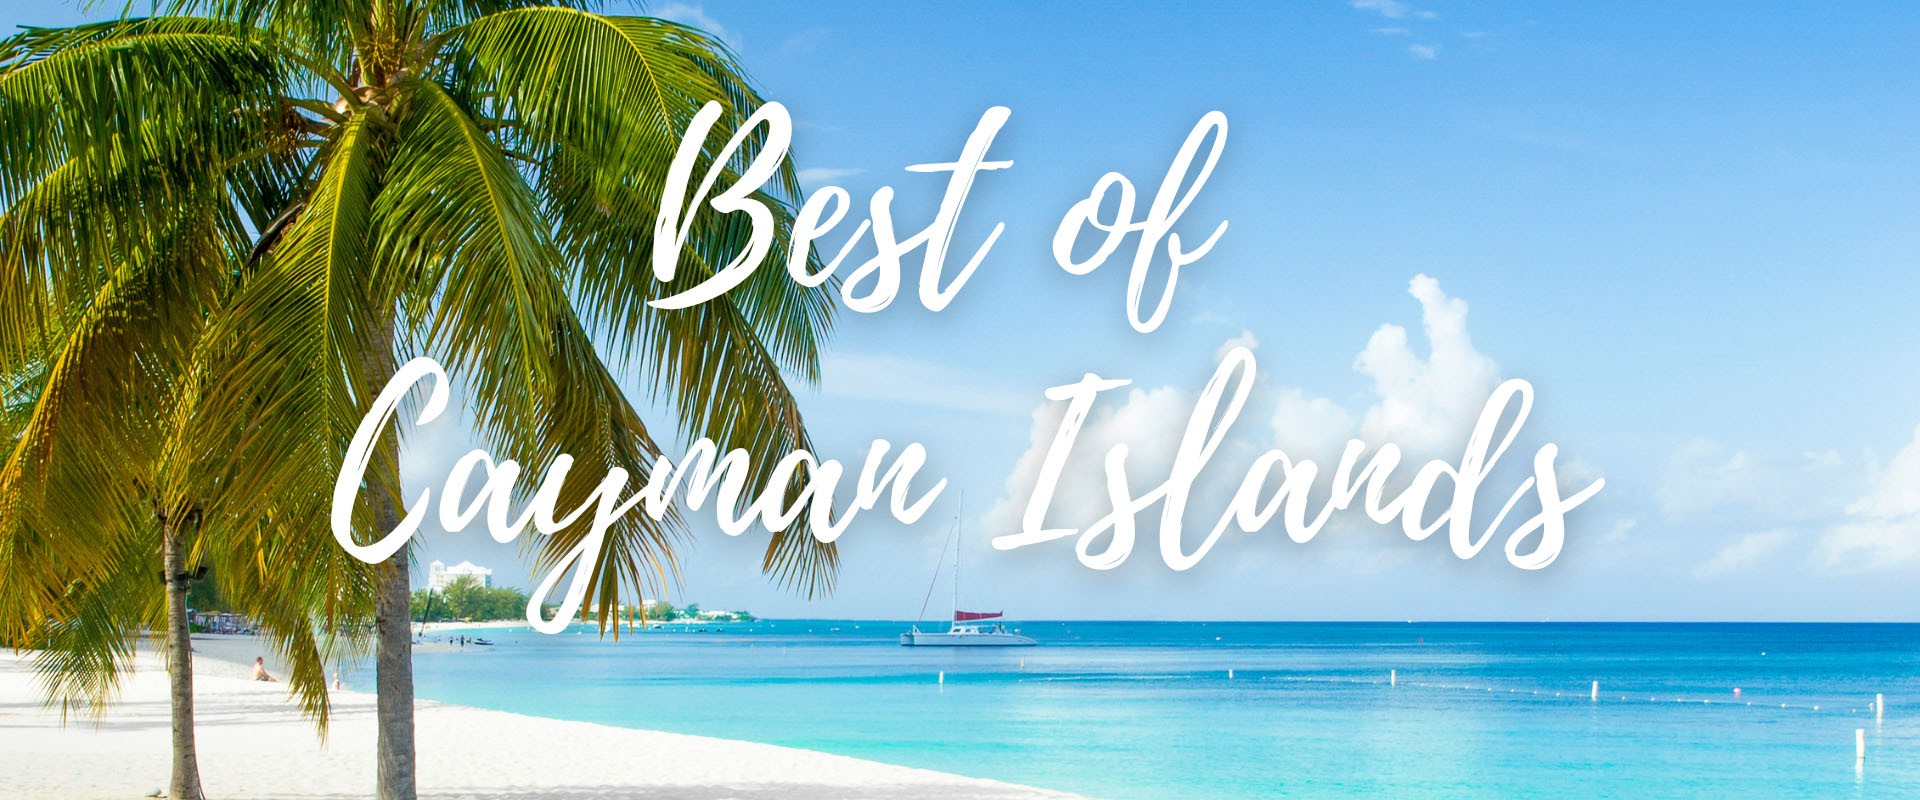 Best of Grand Cayman Guide